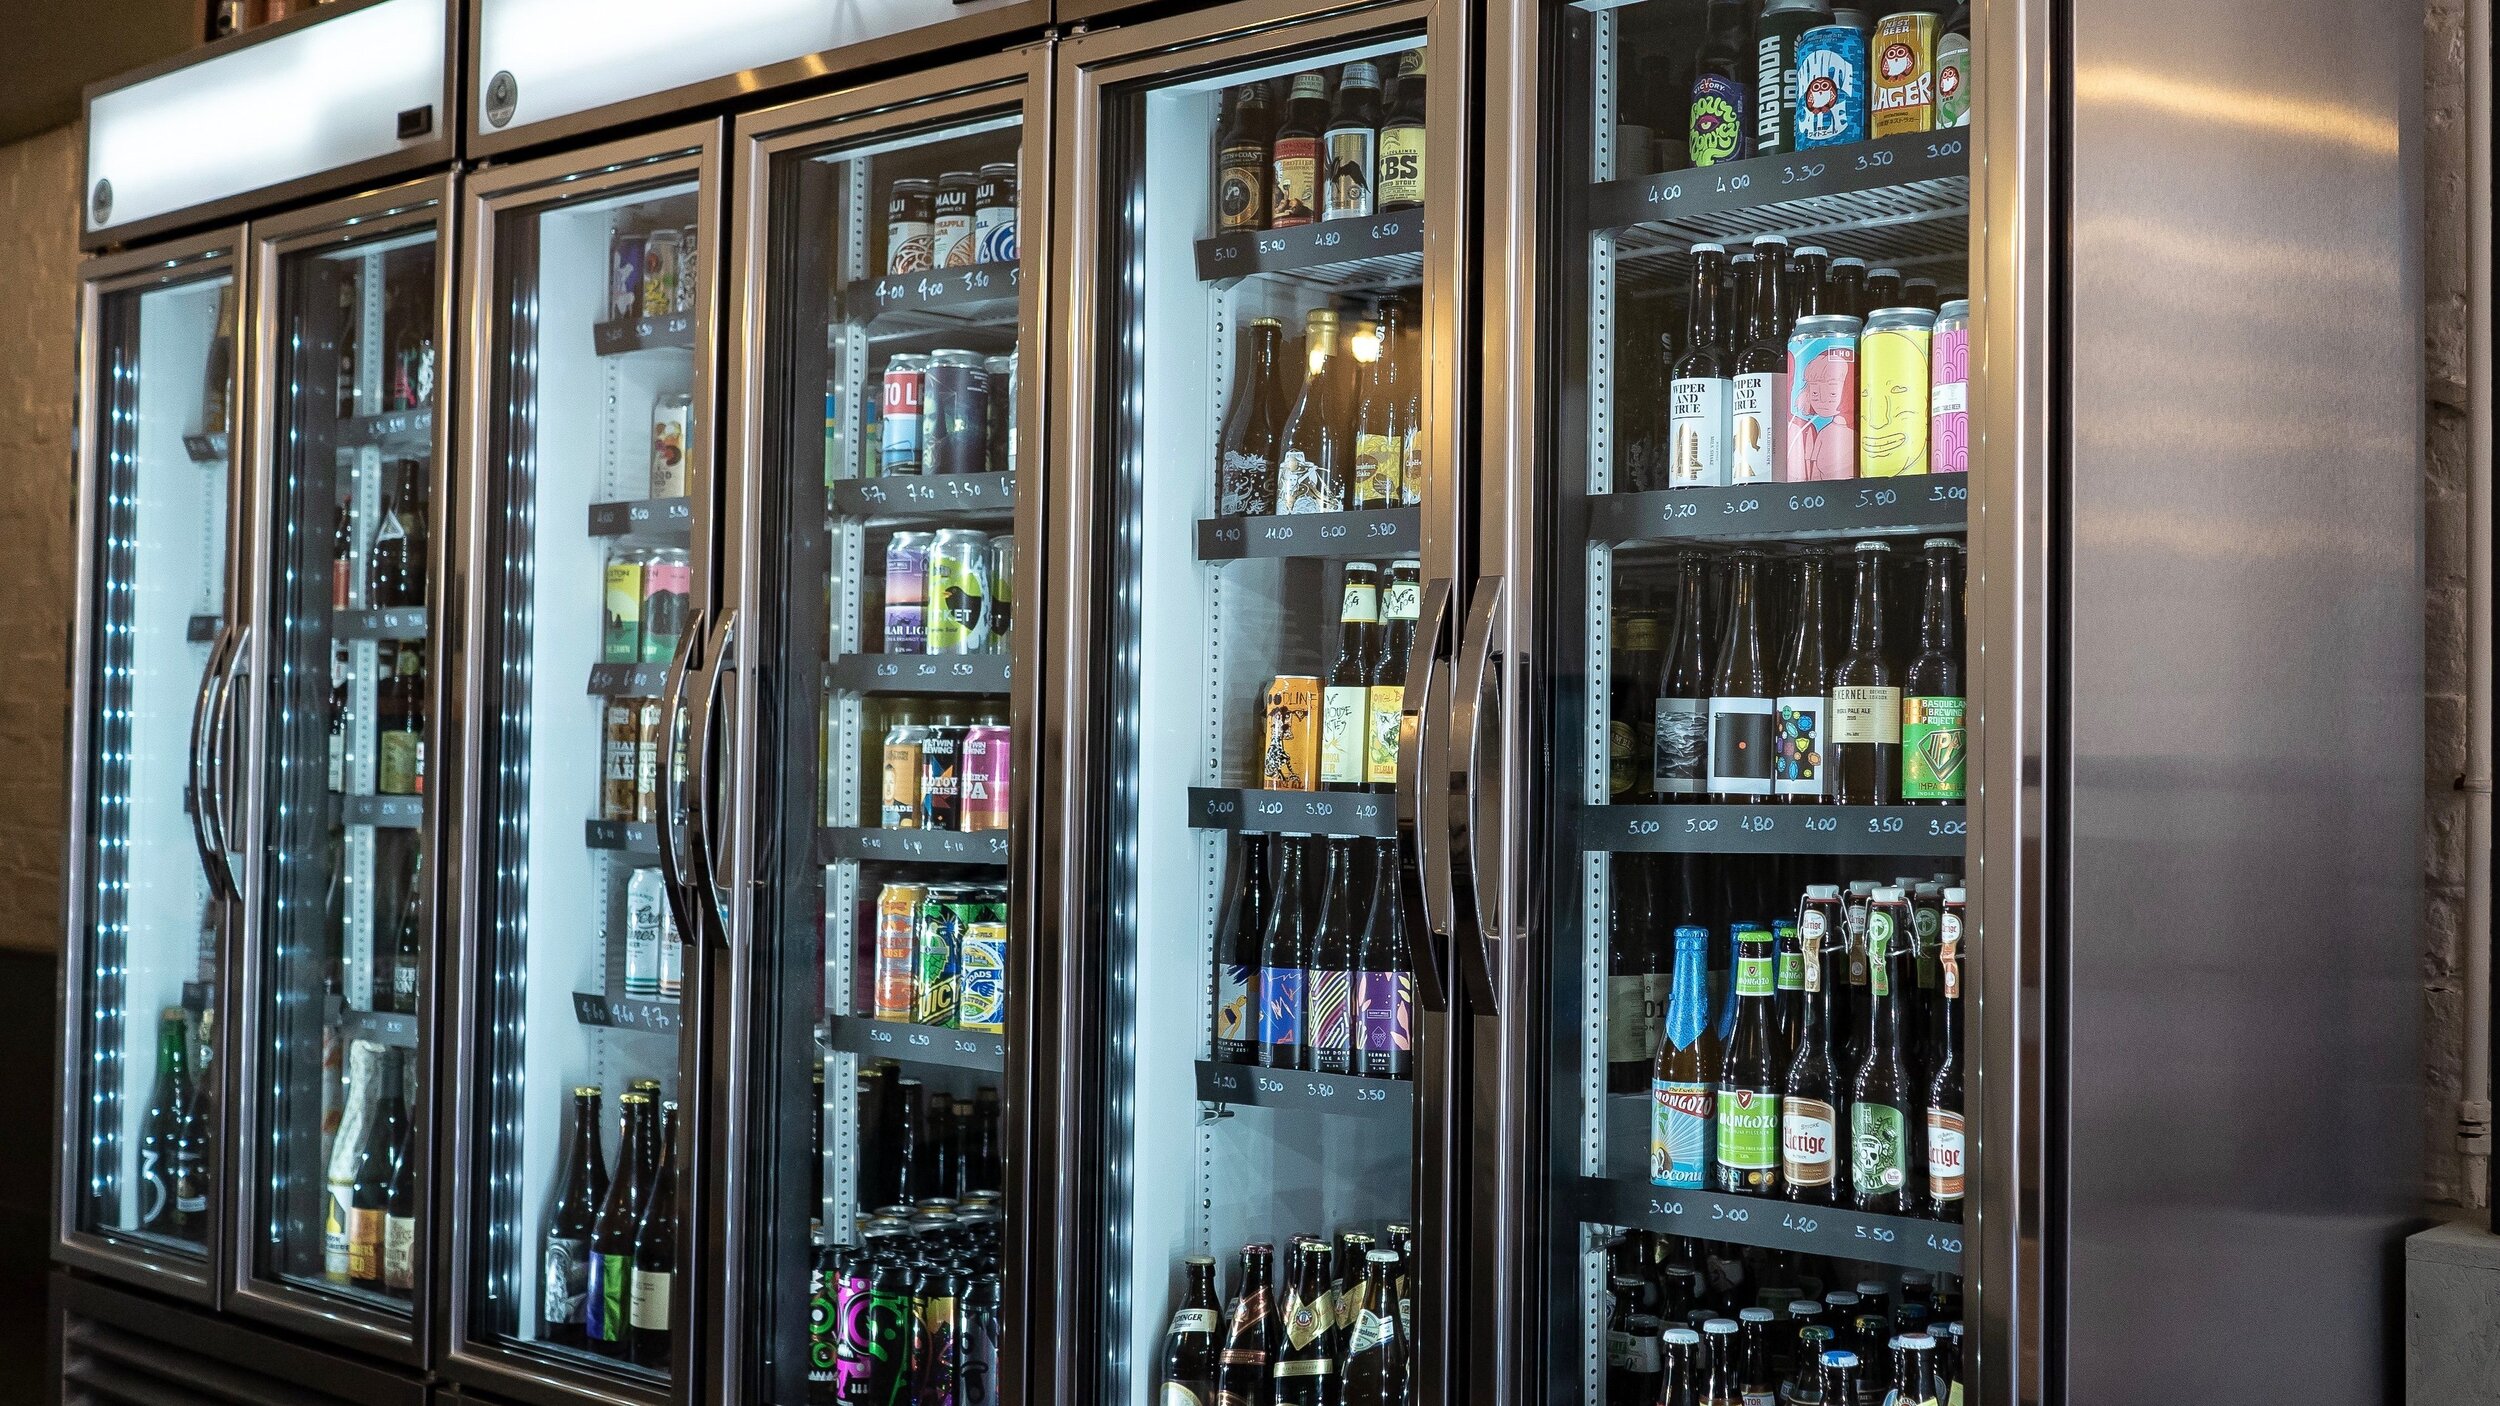 hop lord's, Worcester top bpttle shop, craft beer, real ale tap room, beer yeti review